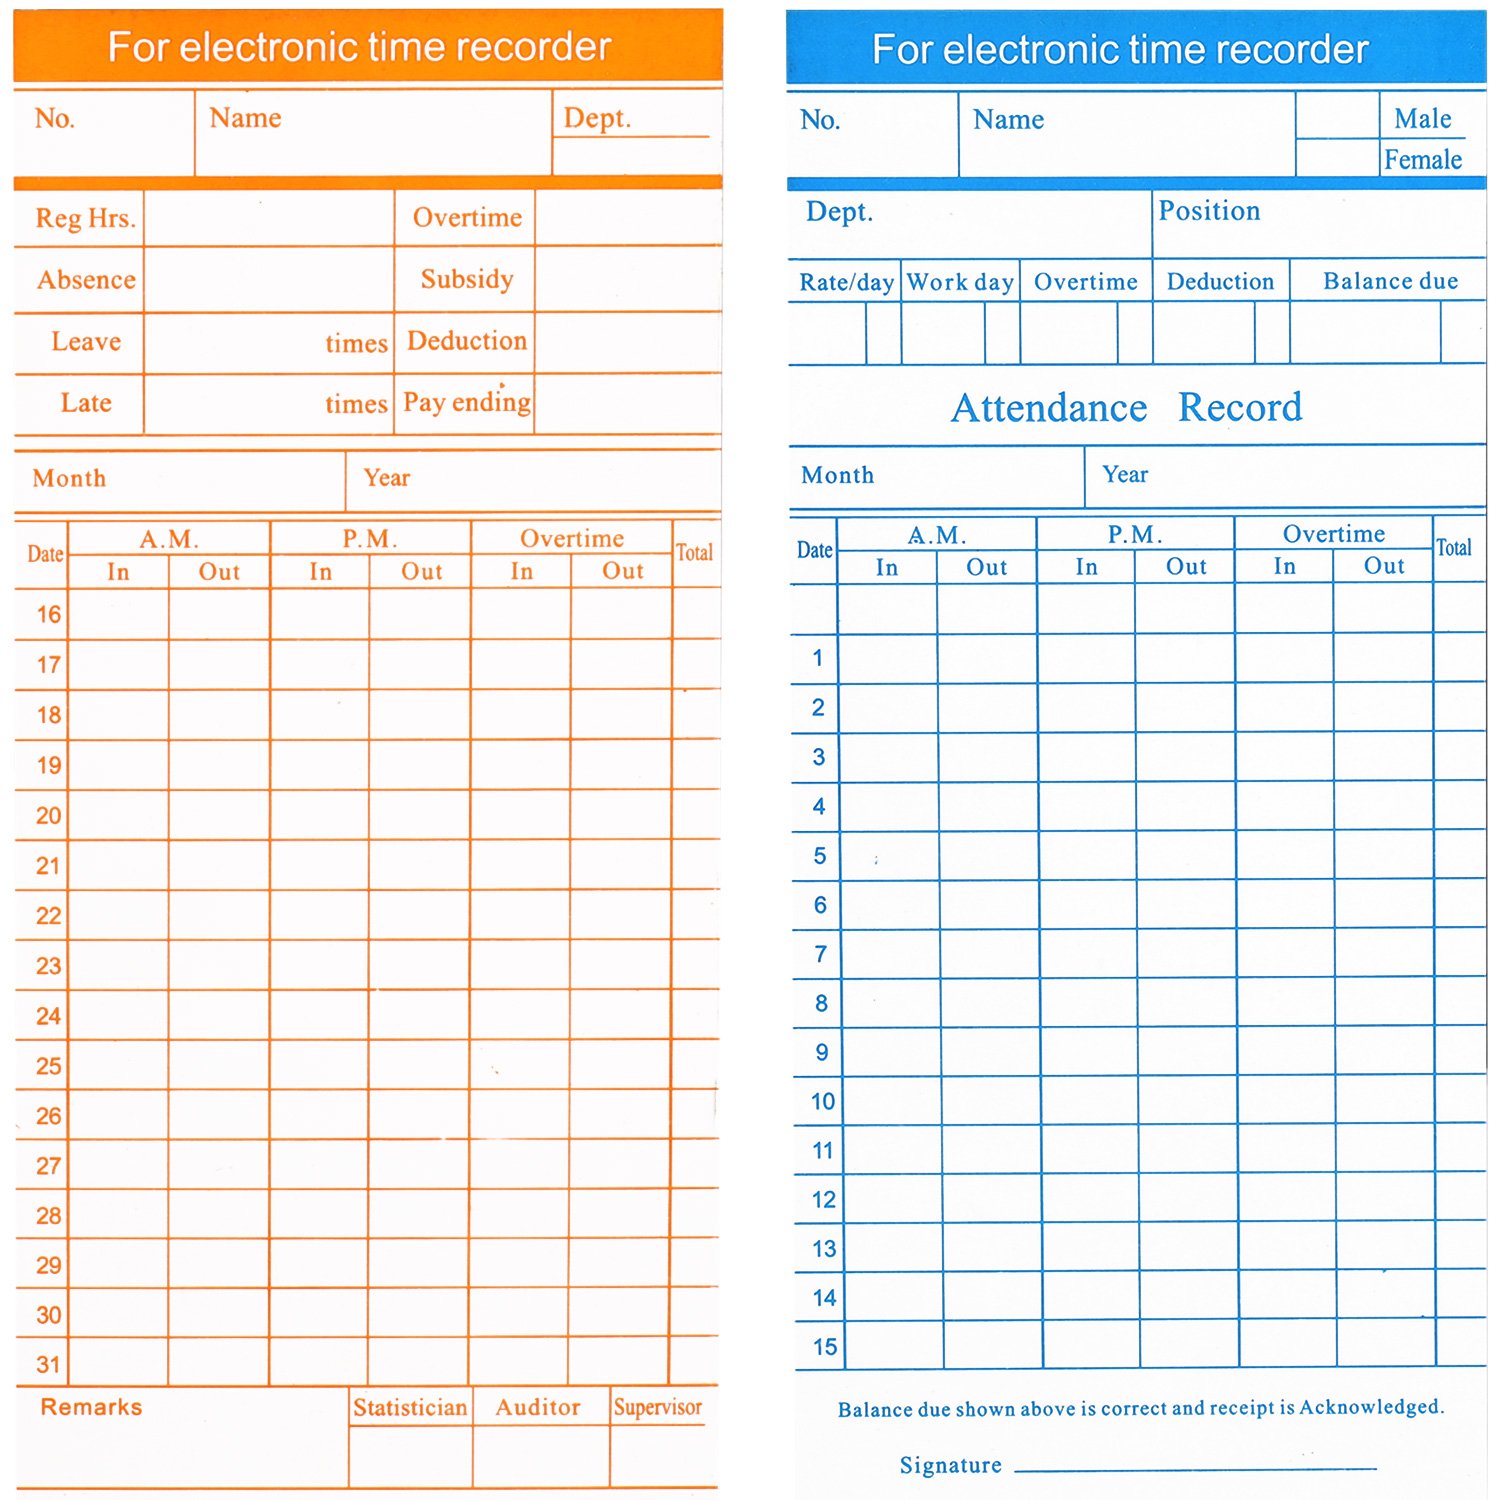 Flexzion Time Cards Monthly Timesheet Clock Timecard - 100 Pack 6 Column 2-Sided Orange/Blue Card for Time Punch Clock Employee Attendance